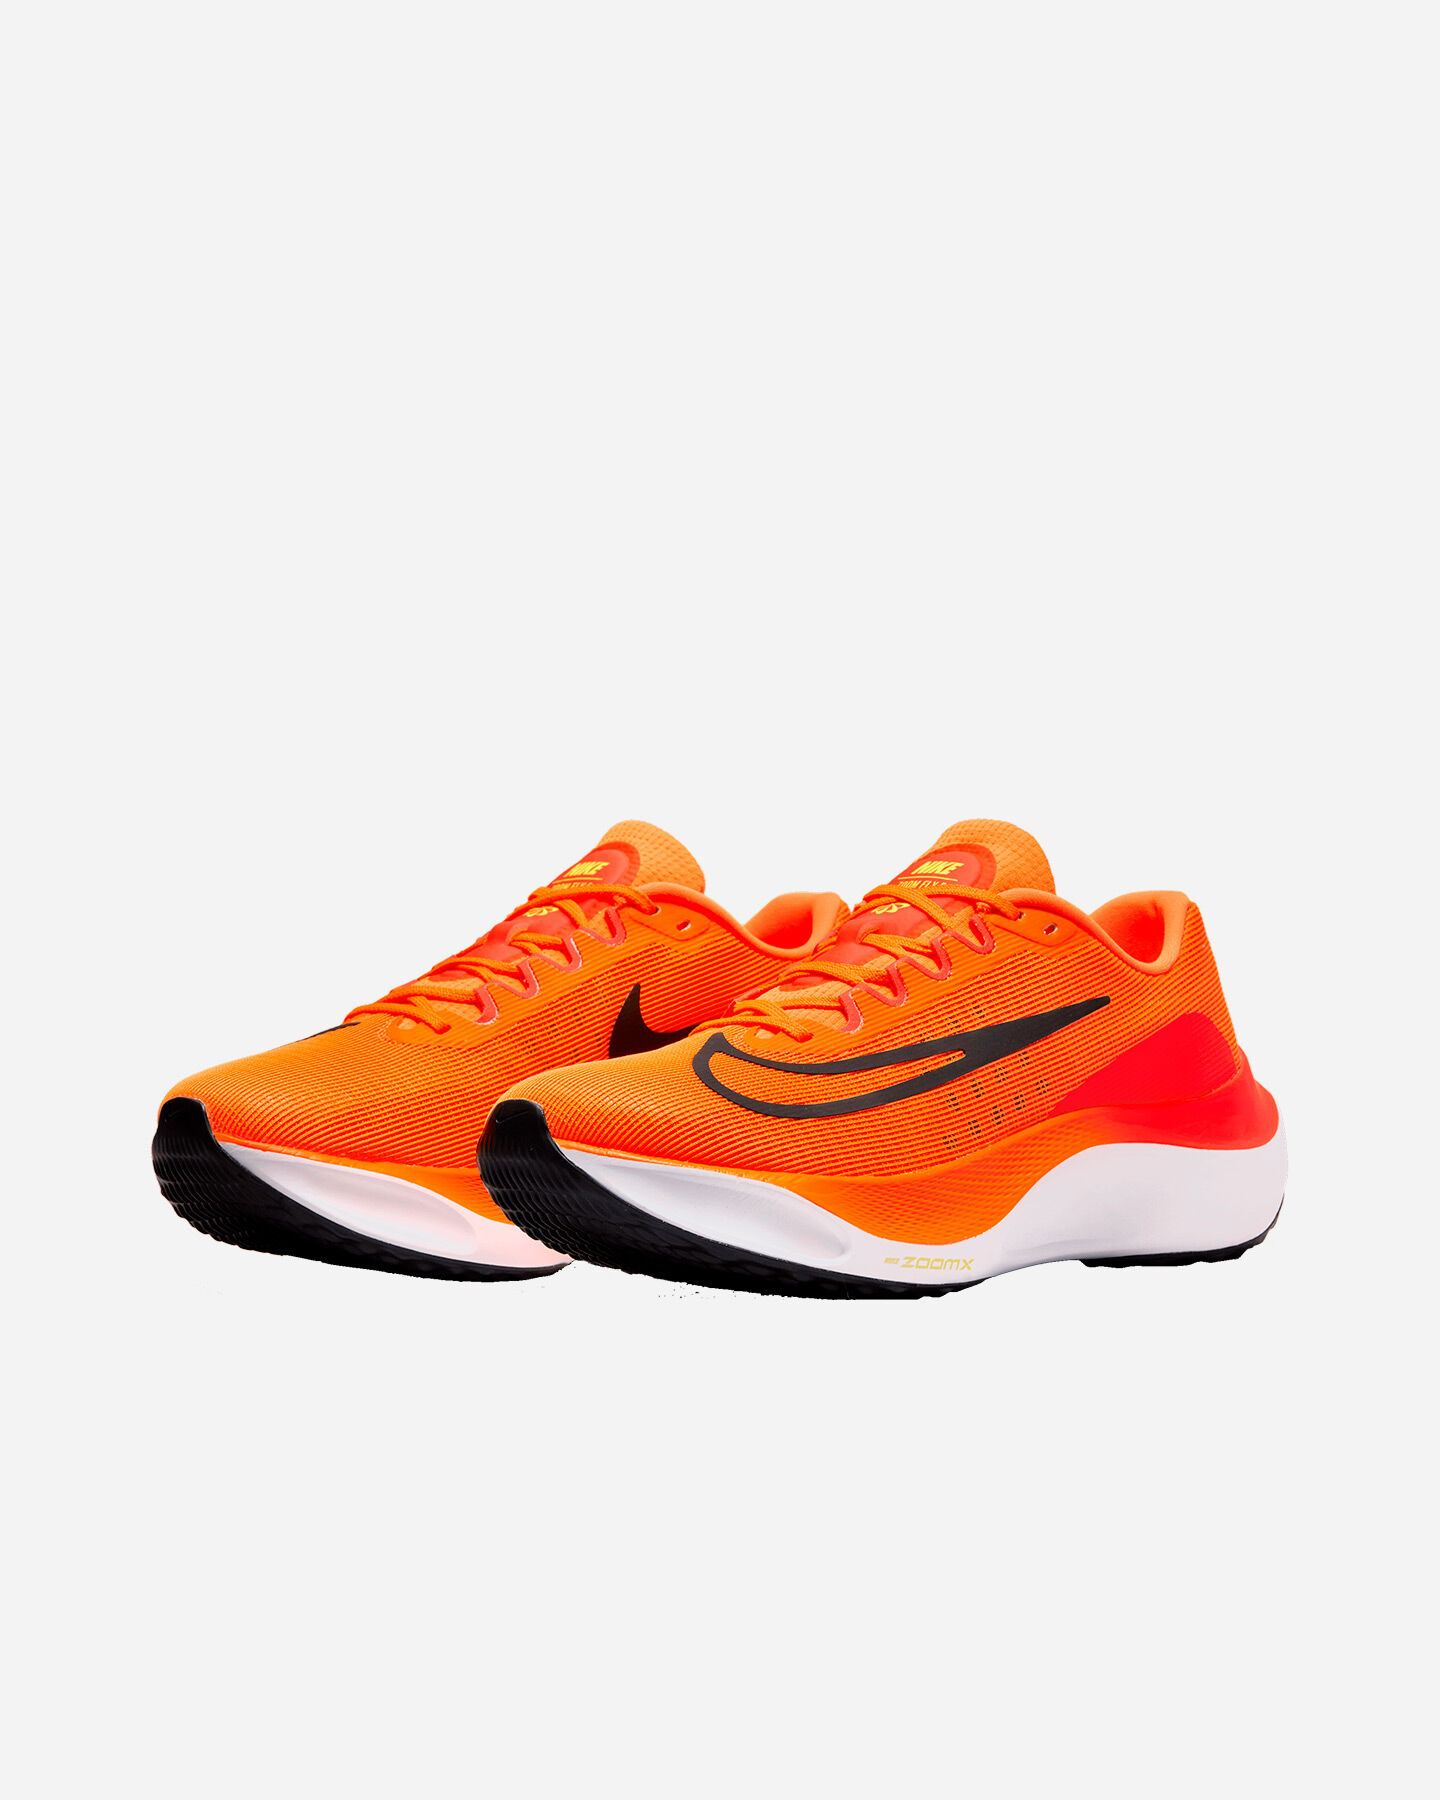  Scarpe running NIKE ZOOM FLY 5 M S5456401|800|6 scatto 1